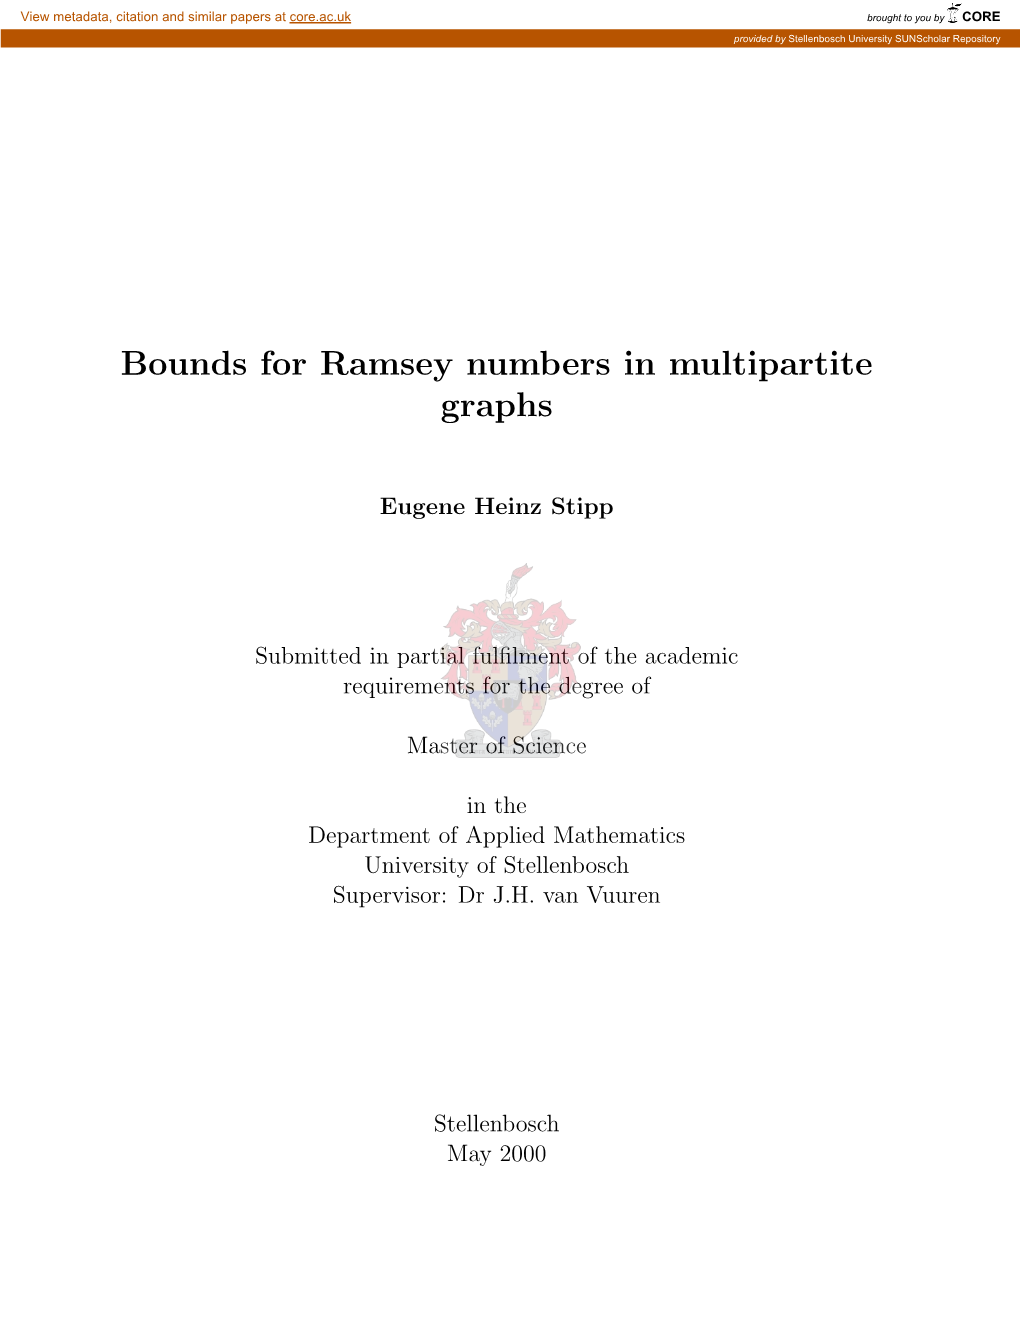 Bounds for Ramsey Numbers in Multipartite Graphs